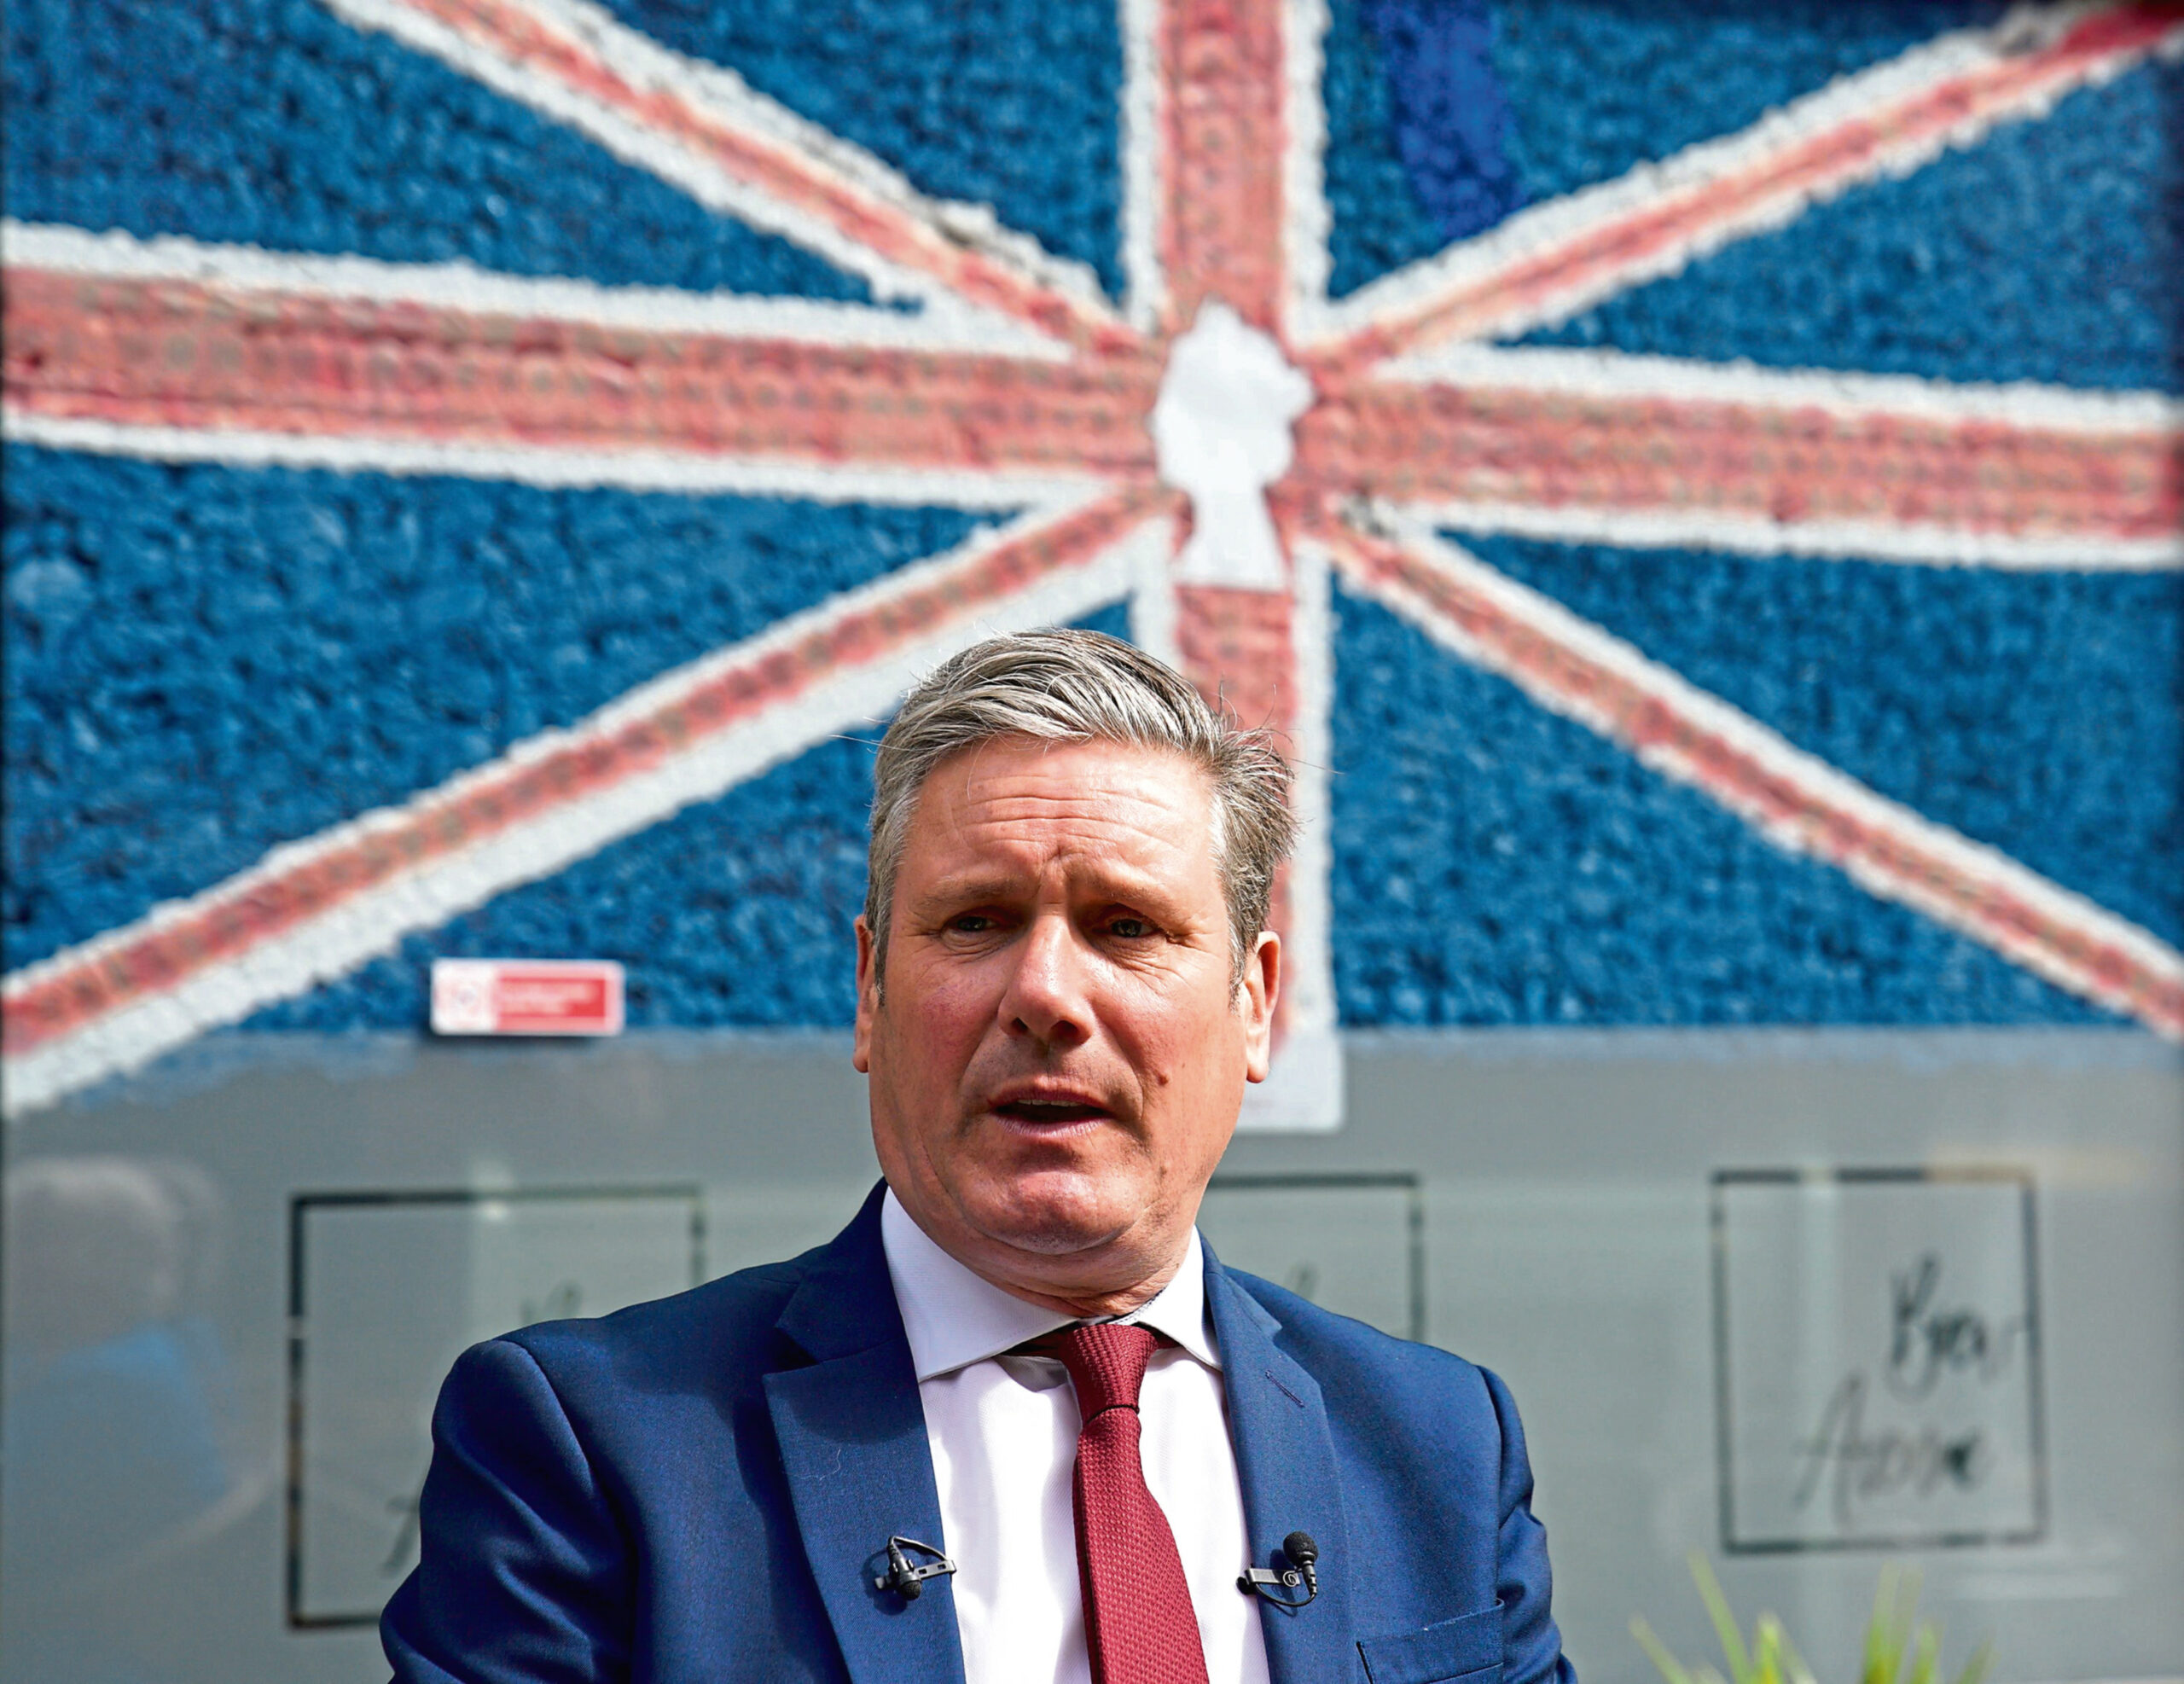 Keir Starmer in front of a union flag with Queen Elizabeth II's silhouette on it